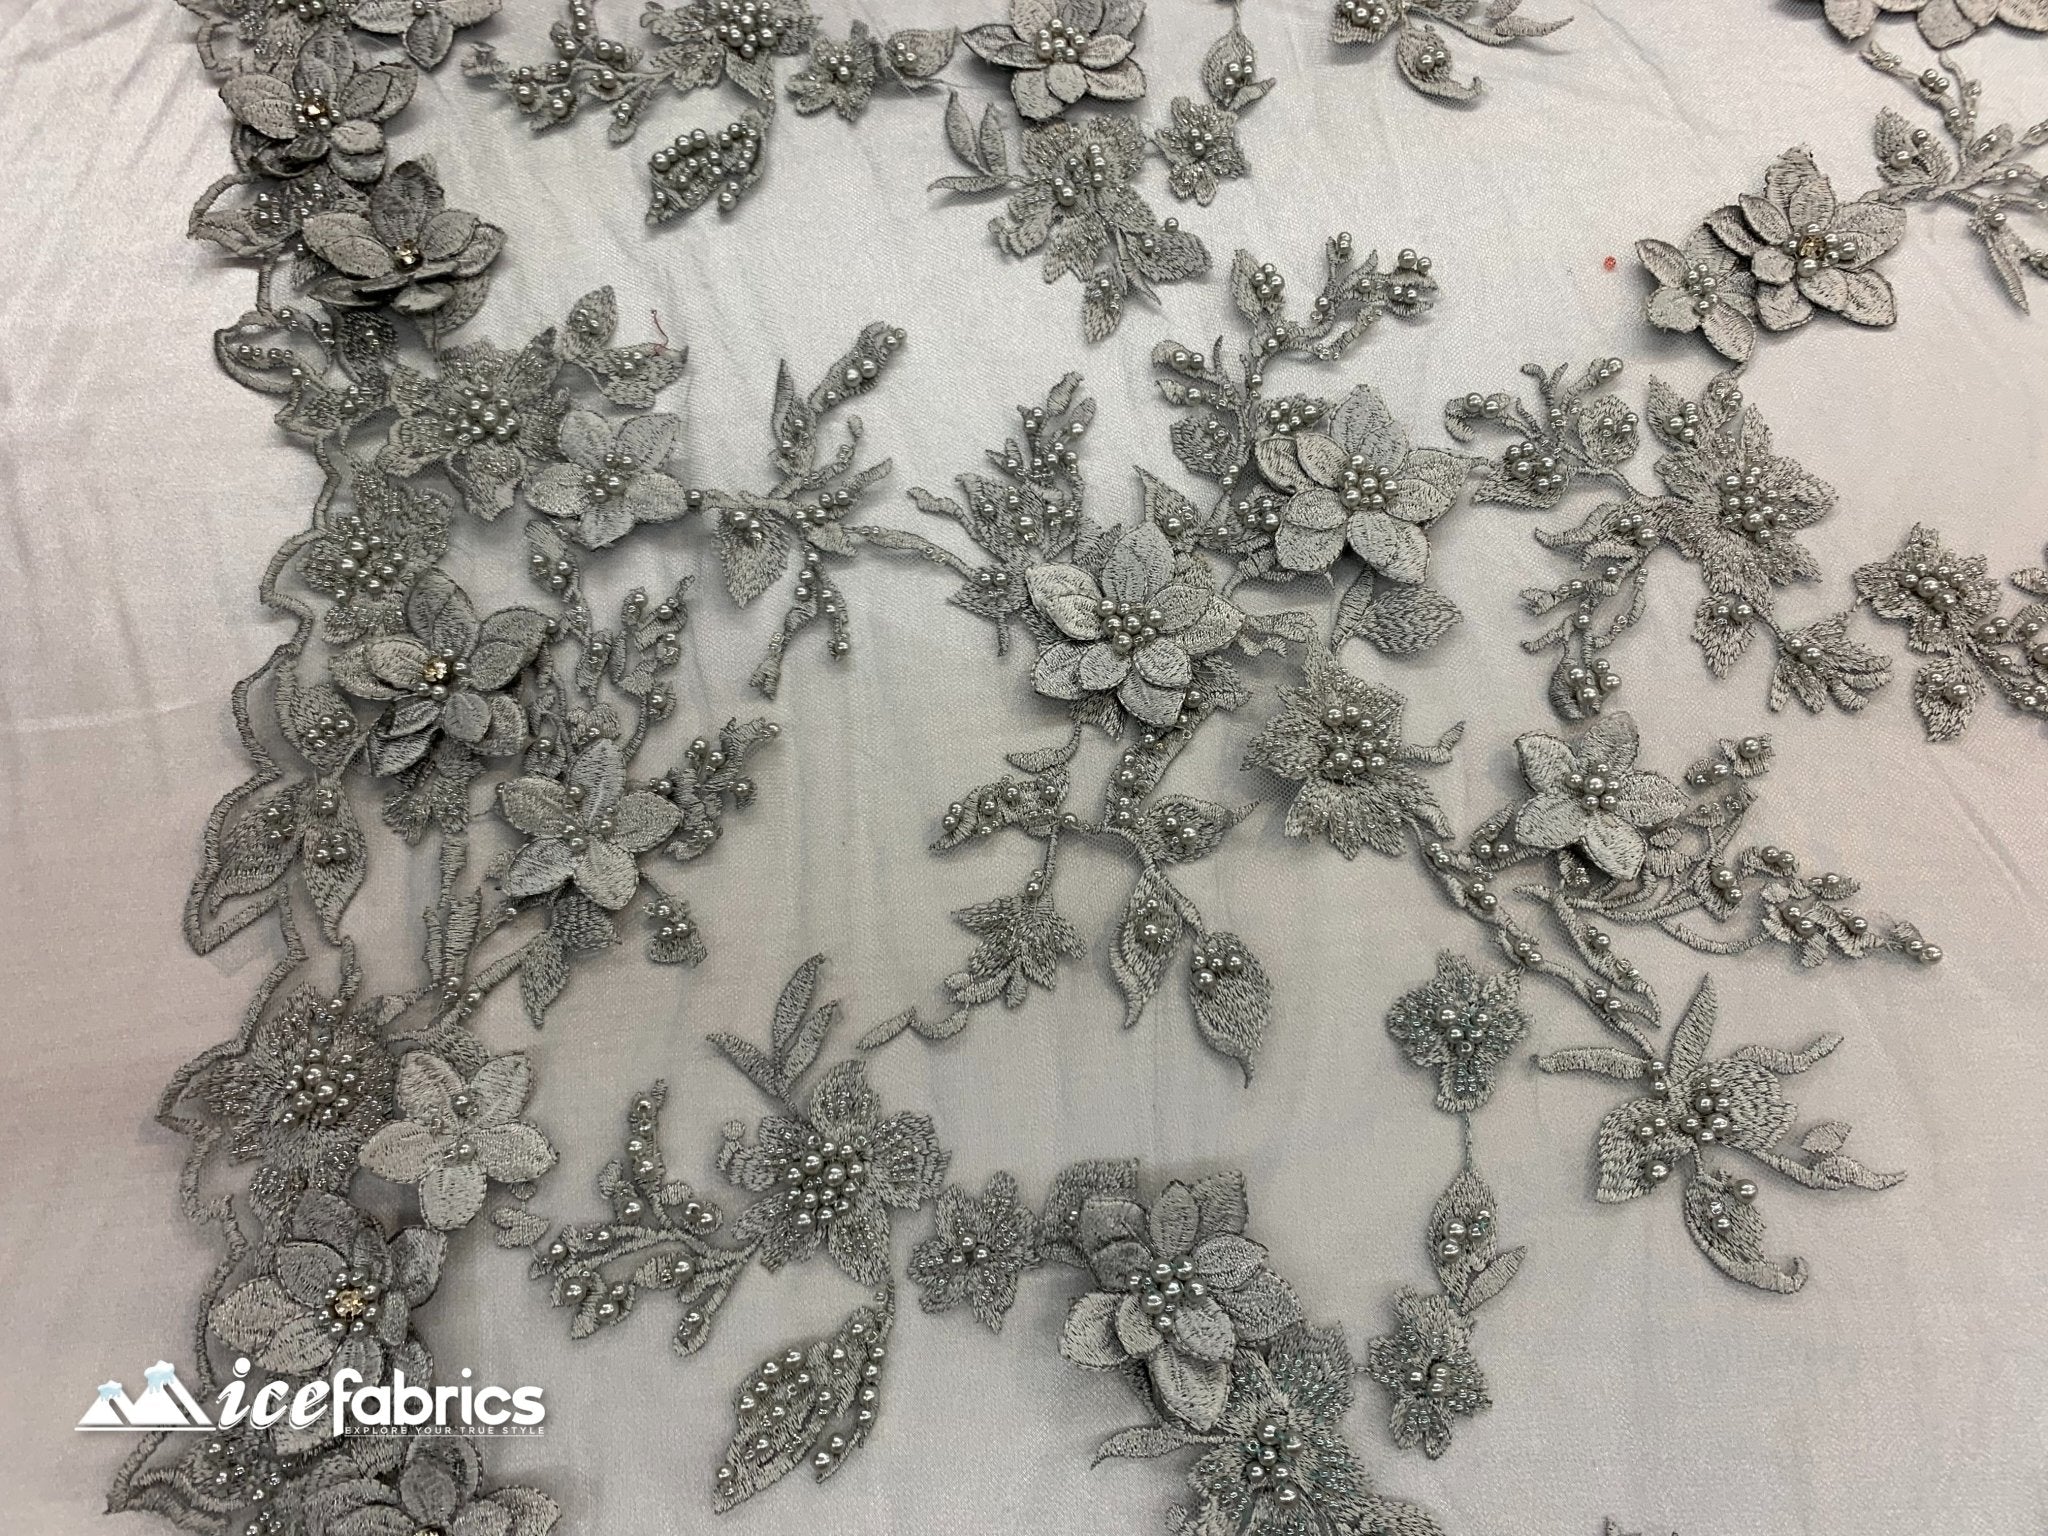 Flowers Embroidered Beaded Fabric/ Mesh Lace Fabric/ Bridal Fabric/ICE FABRICSICE FABRICSSilverFlowers Embroidered Beaded Fabric/ Mesh Lace Fabric/ Bridal Fabric/ ICE FABRICS Silver